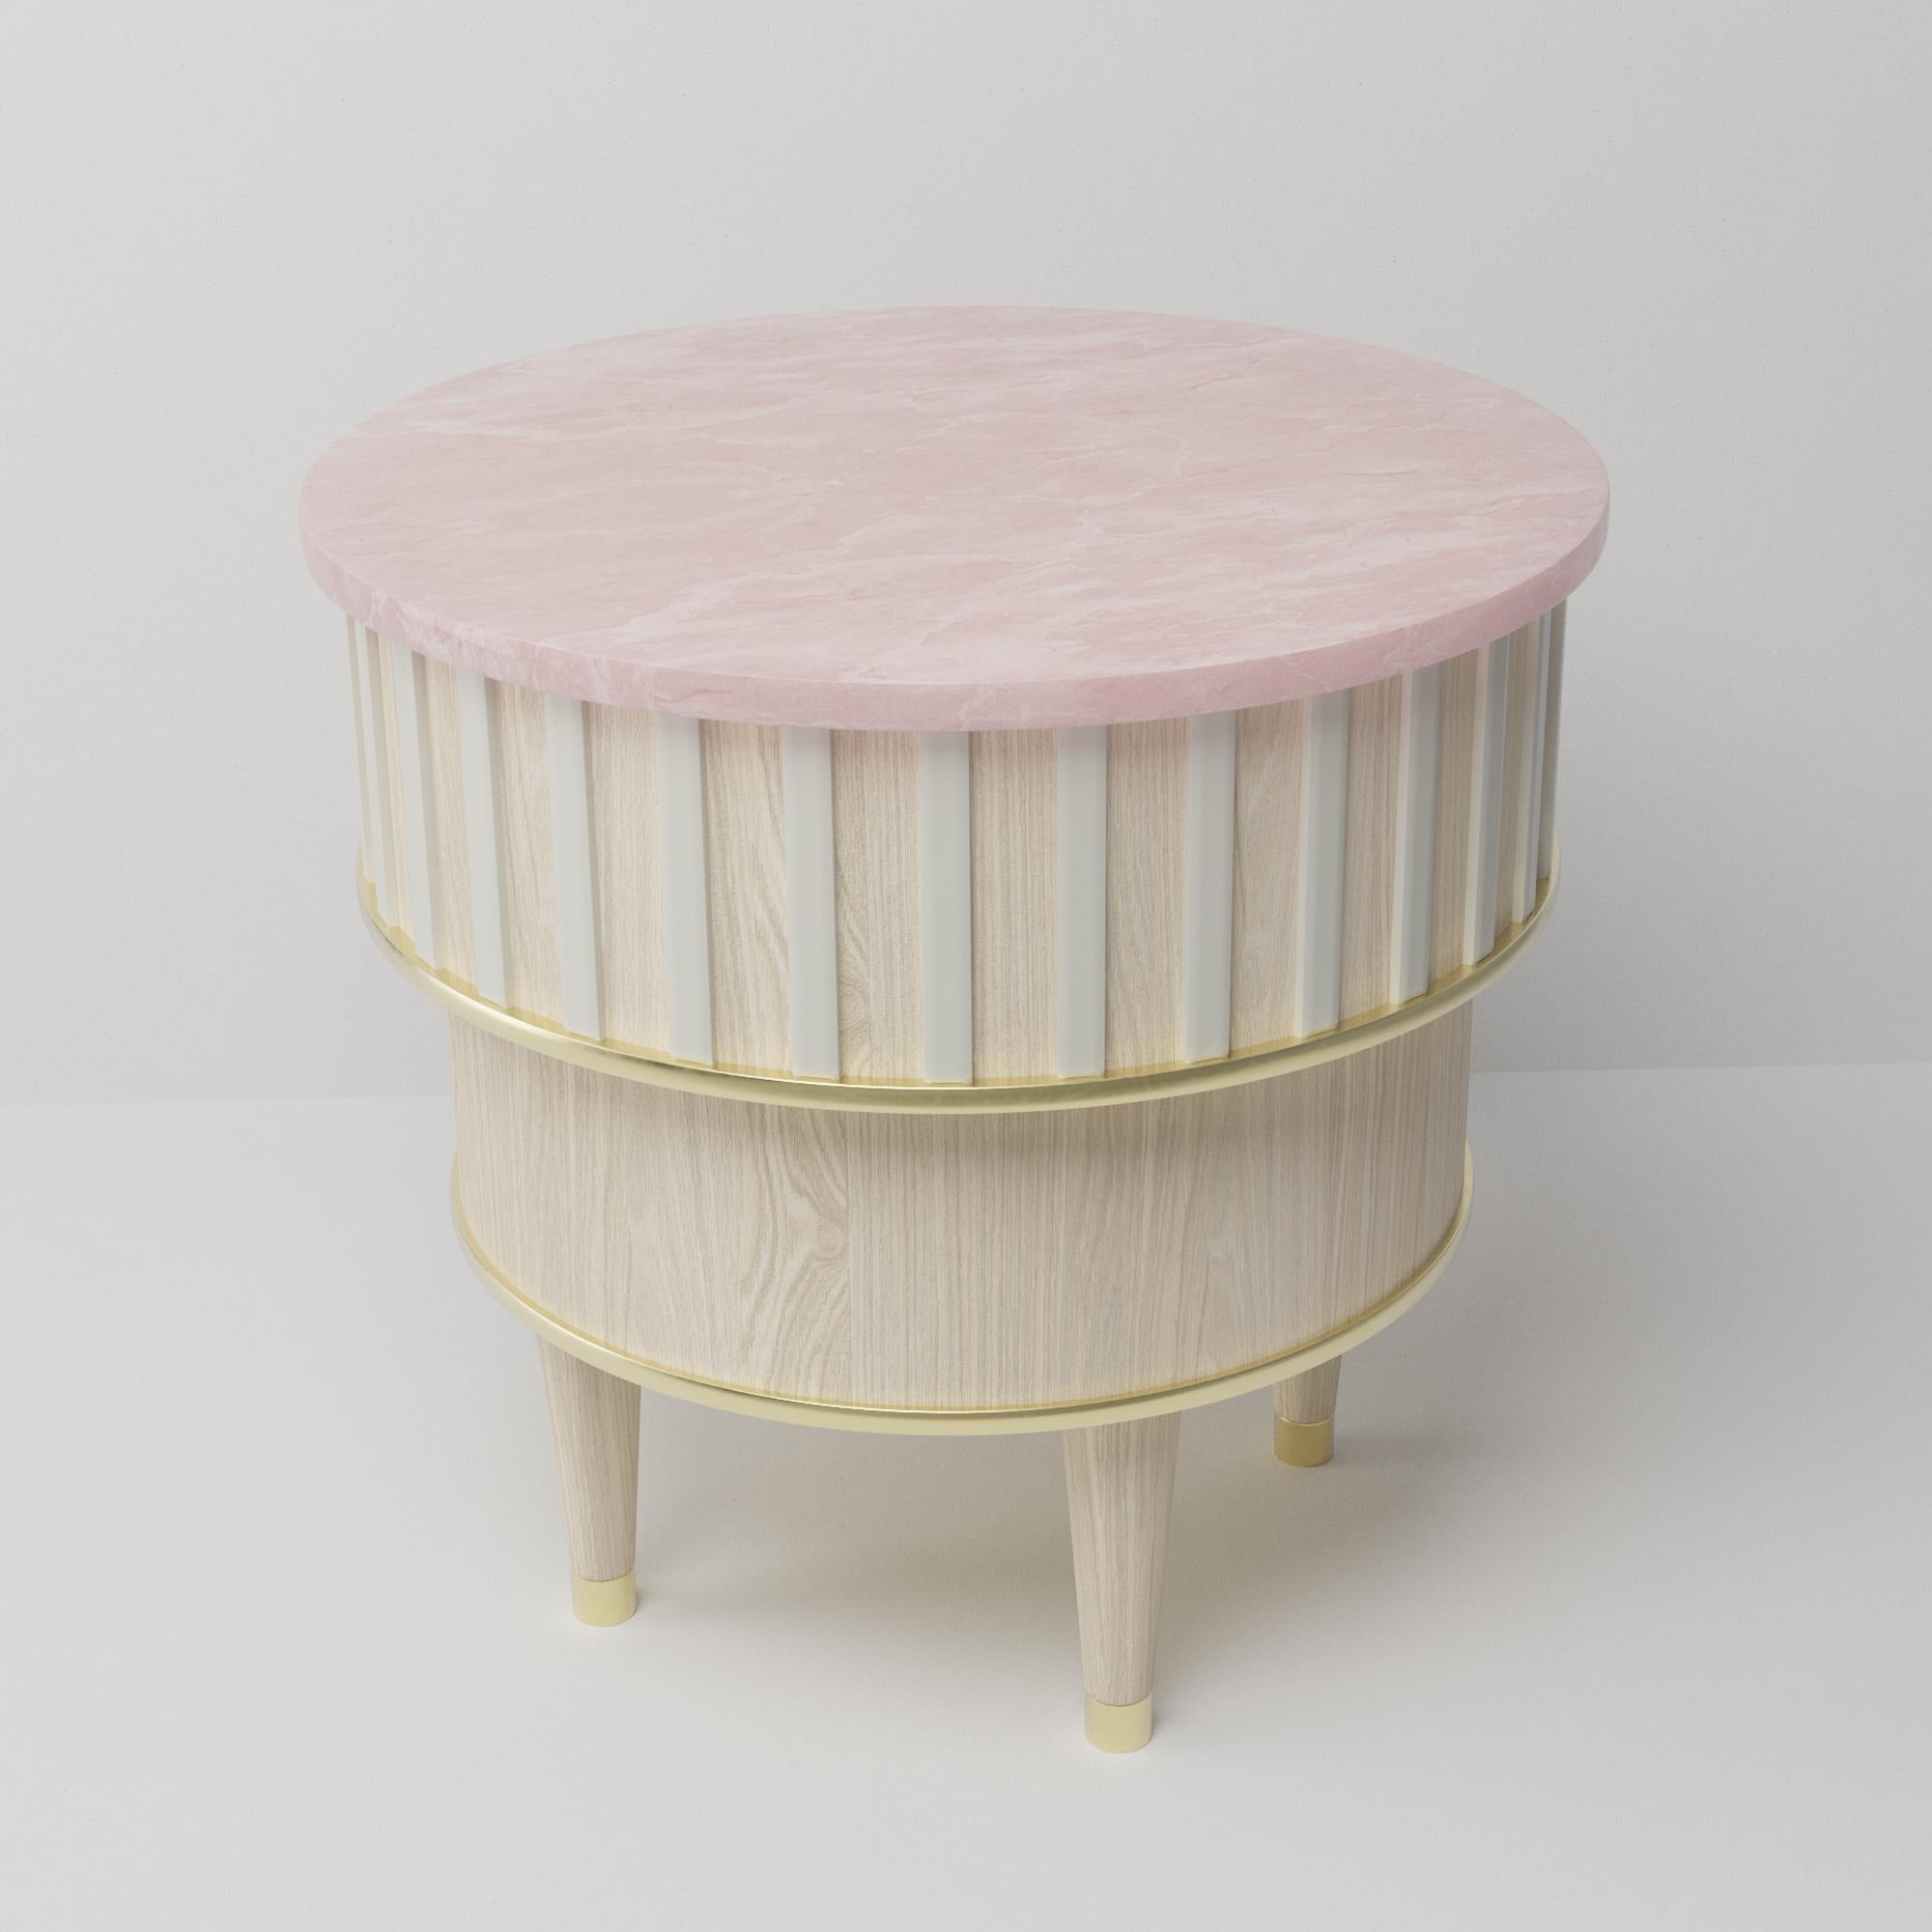 Greta Bleached Oak Brass Corian and White Onyx Side Table by Felice James (Englisch) im Angebot